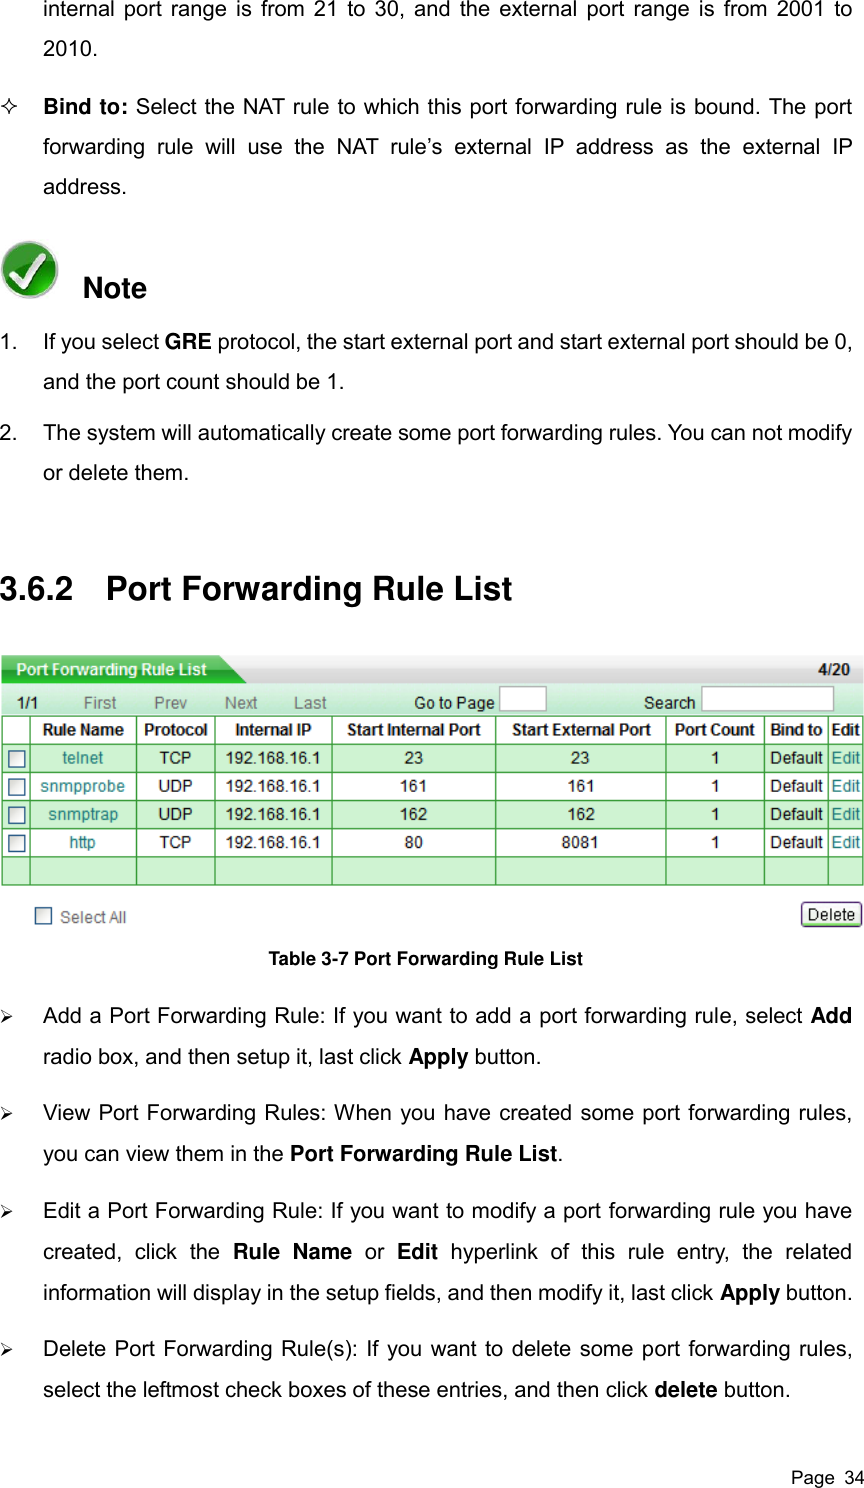  Page  34 internal port range is from 21 to 30, and the external port range is from 2001 to 2010.  Bind to: Select the NAT rule to which this port forwarding rule is bound. The port forwarding  rule  will  use  the  NAT  rule’s  external  IP  address  as  the  external  IP address.       Note 1.  If you select GRE protocol, the start external port and start external port should be 0, and the port count should be 1.   2.  The system will automatically create some port forwarding rules. You can not modify or delete them. 3.6.2  Port Forwarding Rule List  Table 3-7 Port Forwarding Rule List  Add a Port Forwarding Rule: If you want to add a port forwarding rule, select Add radio box, and then setup it, last click Apply button.  View Port Forwarding Rules: When you have created some port forwarding rules, you can view them in the Port Forwarding Rule List.  Edit a Port Forwarding Rule: If you want to modify a port forwarding rule you have created,  click  the  Rule  Name  or  Edit  hyperlink  of  this  rule  entry,  the  related information will display in the setup fields, and then modify it, last click Apply button.  Delete Port Forwarding Rule(s): If you want to delete some port forwarding rules, select the leftmost check boxes of these entries, and then click delete button. 